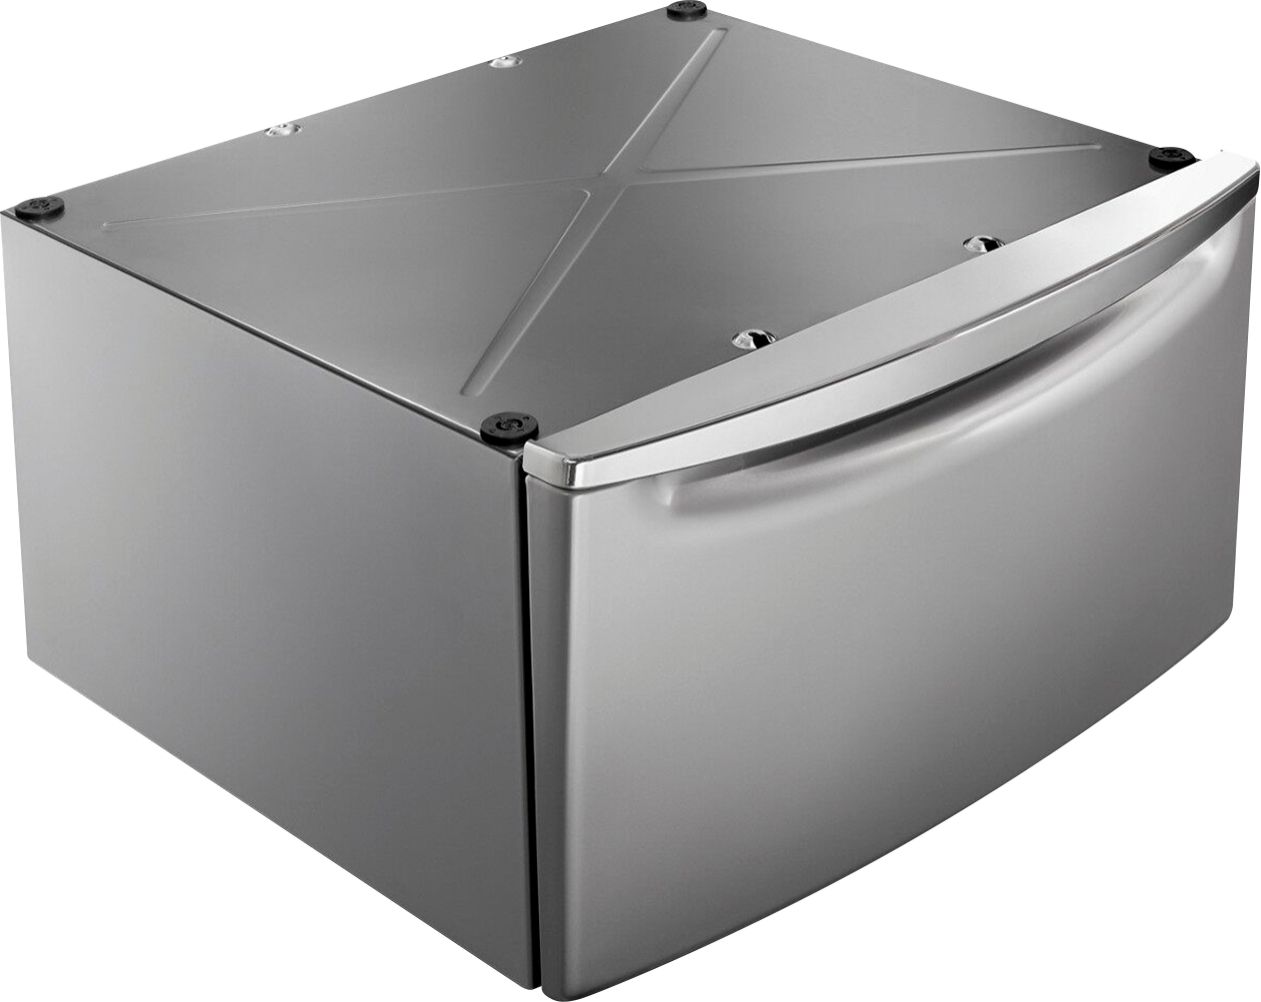 Angle View: Maytag - Washer/Dryer Laundry Pedestal with Storage Drawer - Metallic Slate